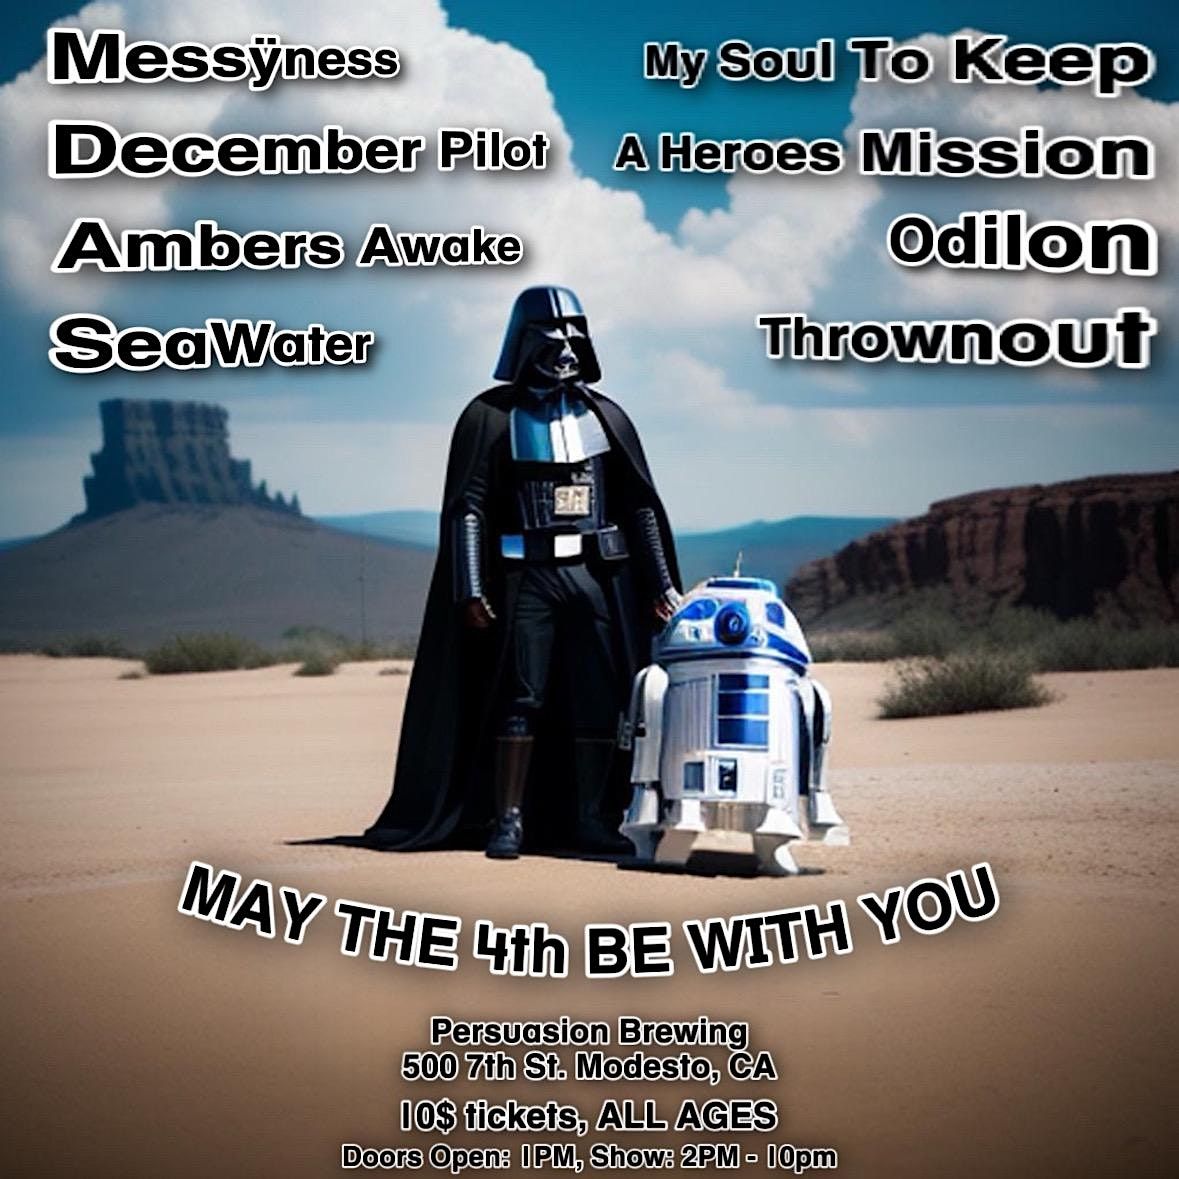 May The 4th Be With You Rock Show @ Persuasion Brewing